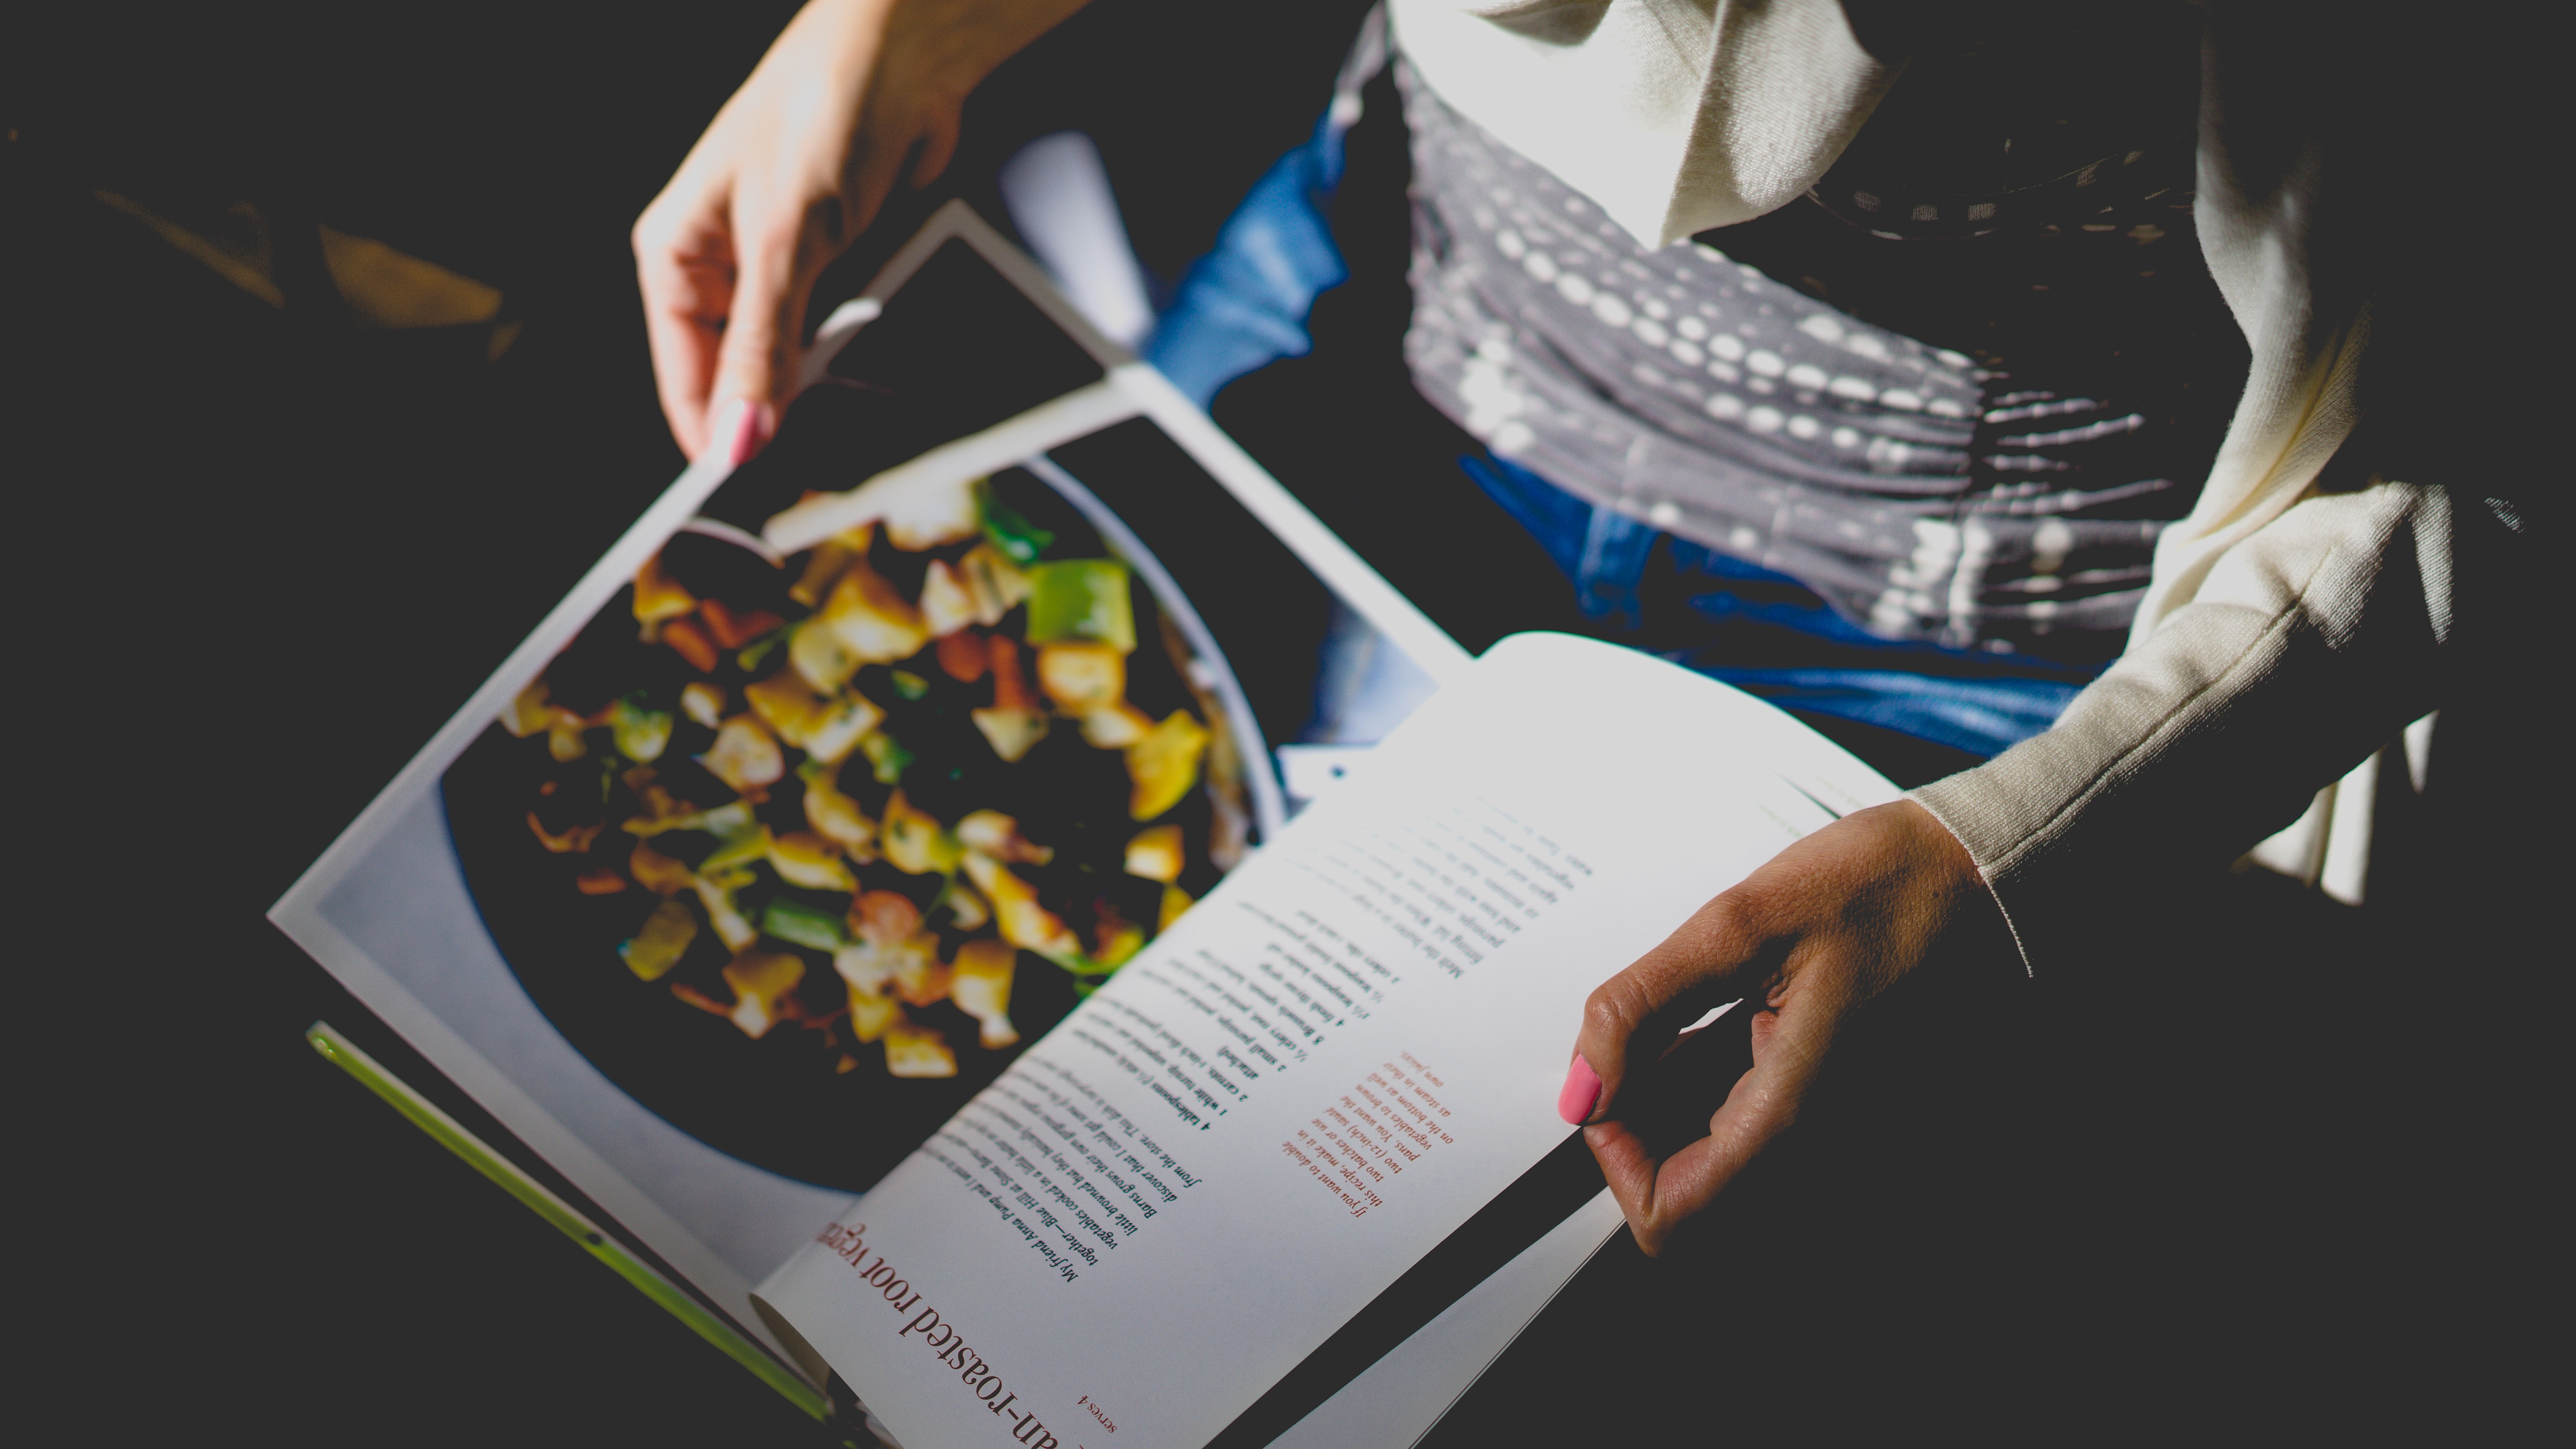 Organising your cookbook: how to play with different structures